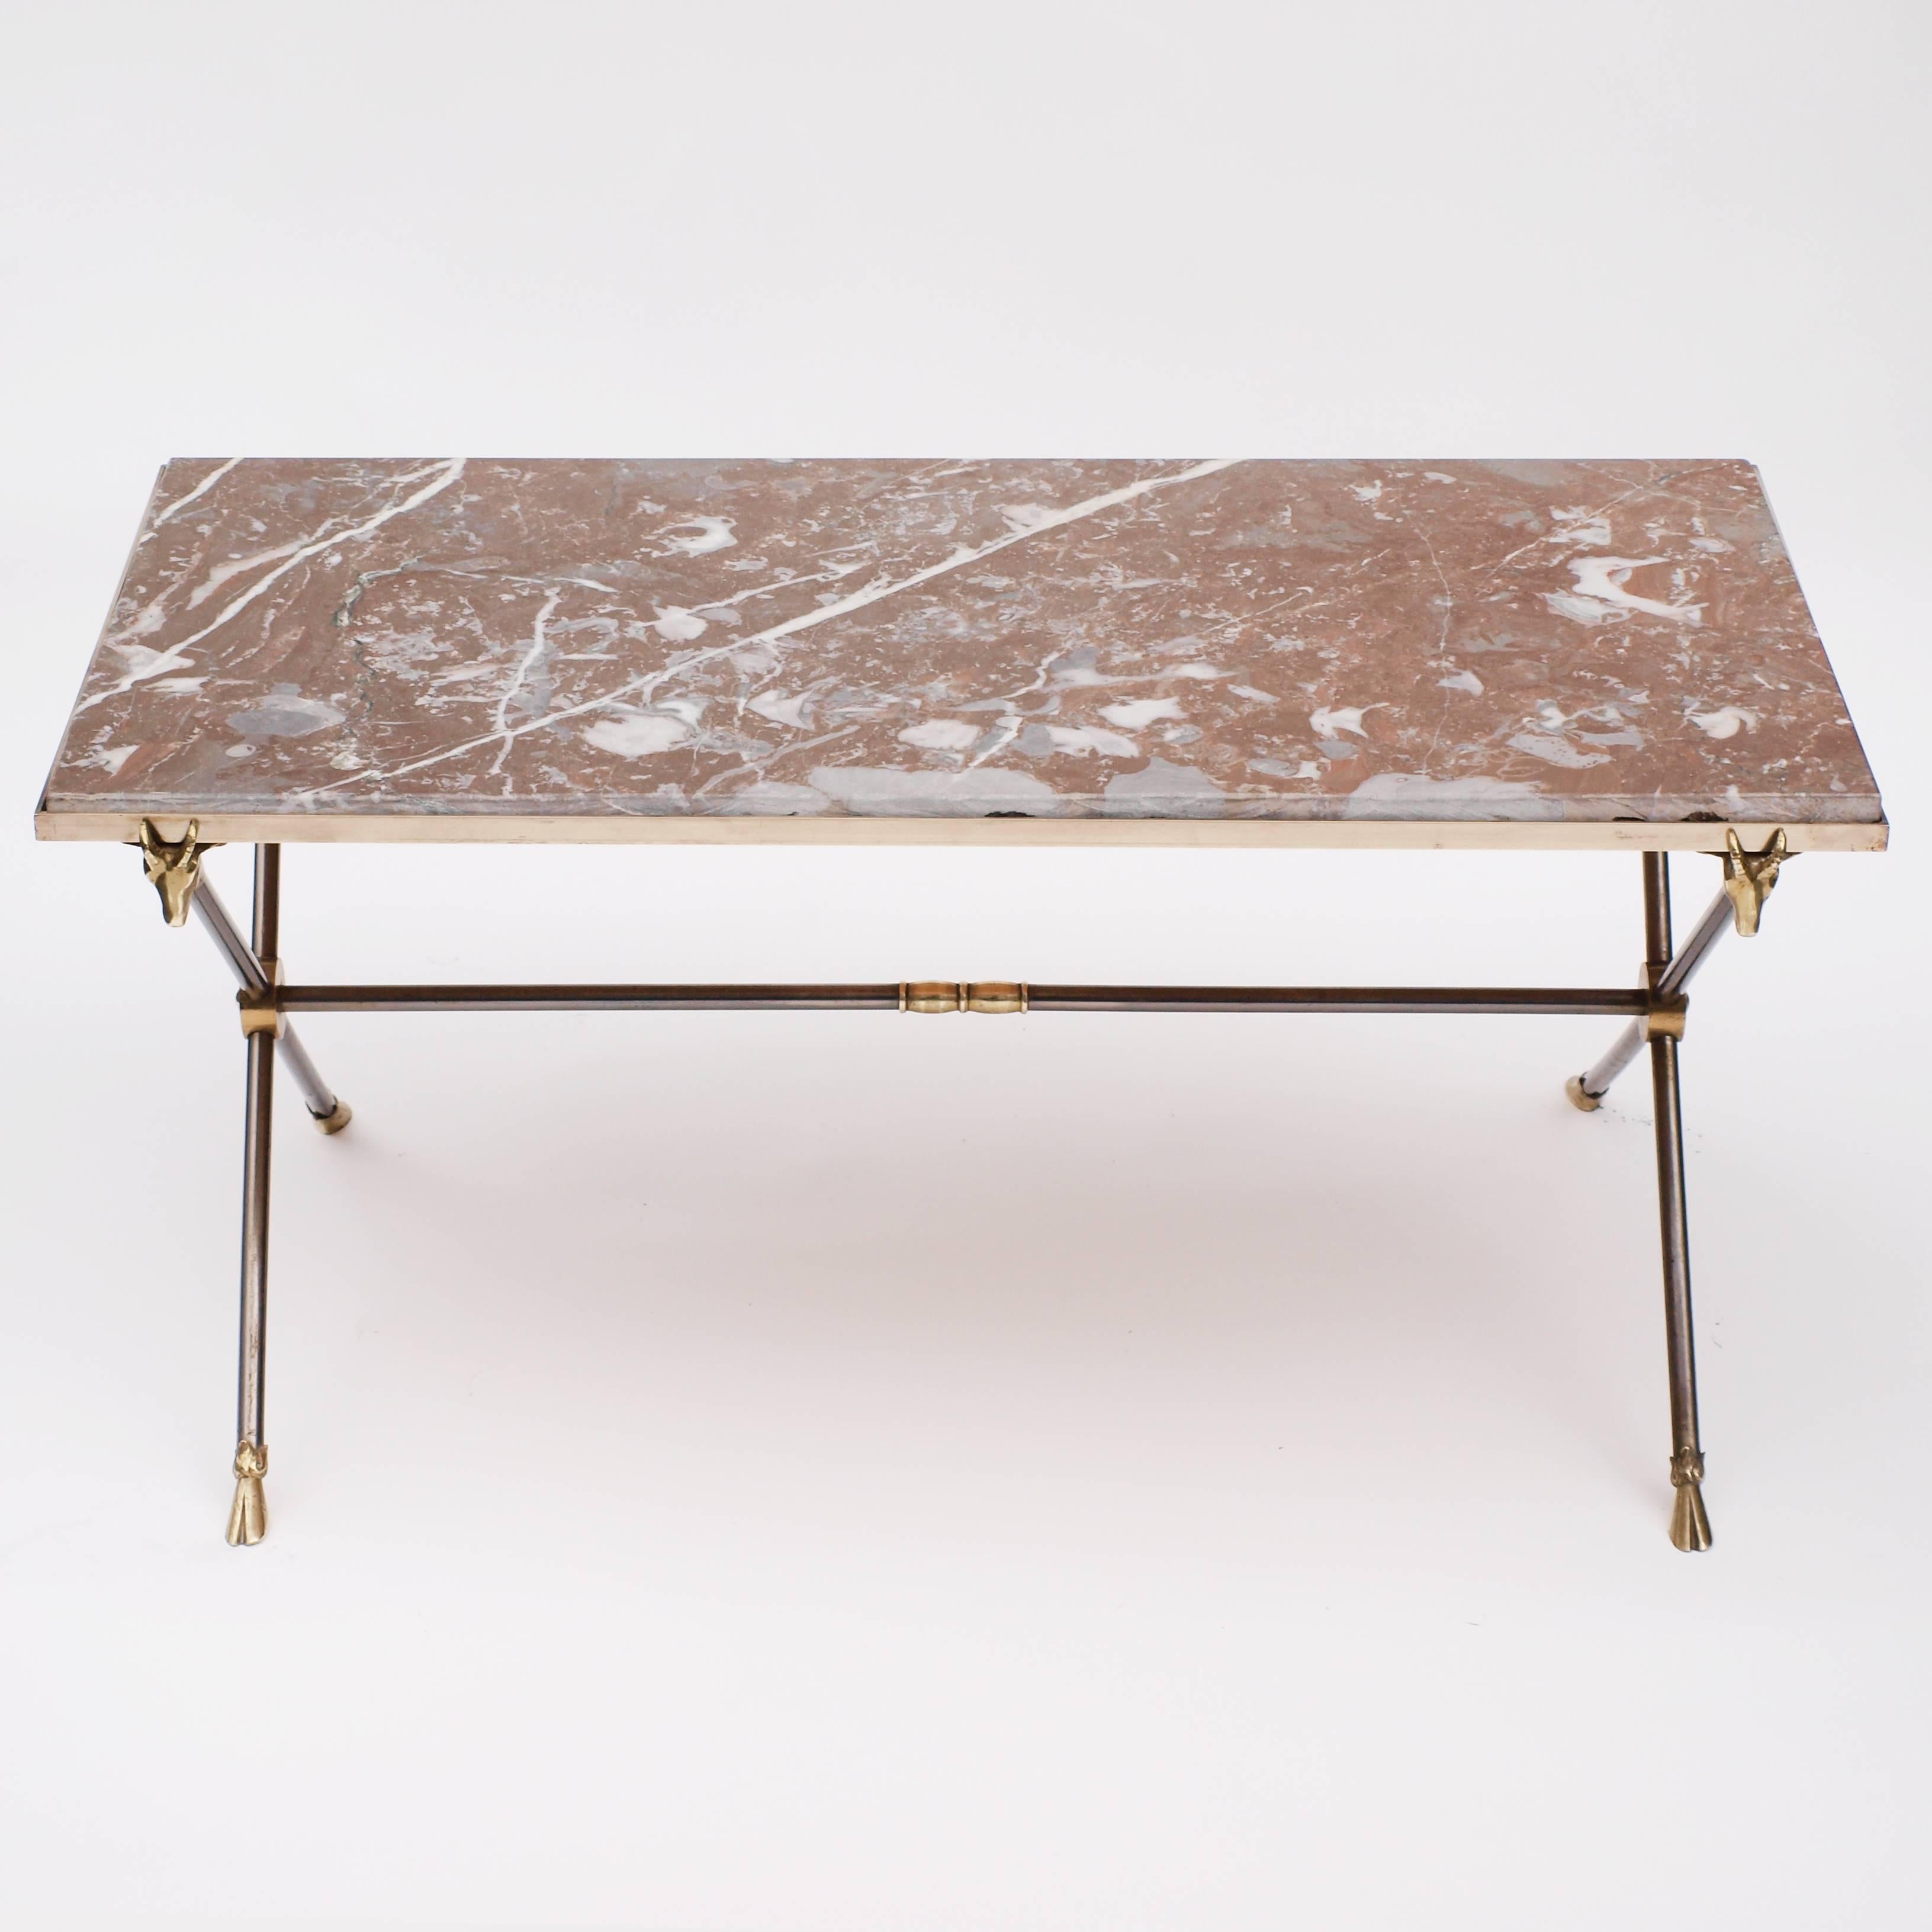 French Maison Ramsay Brass, Nickel and Marble Coffee Table